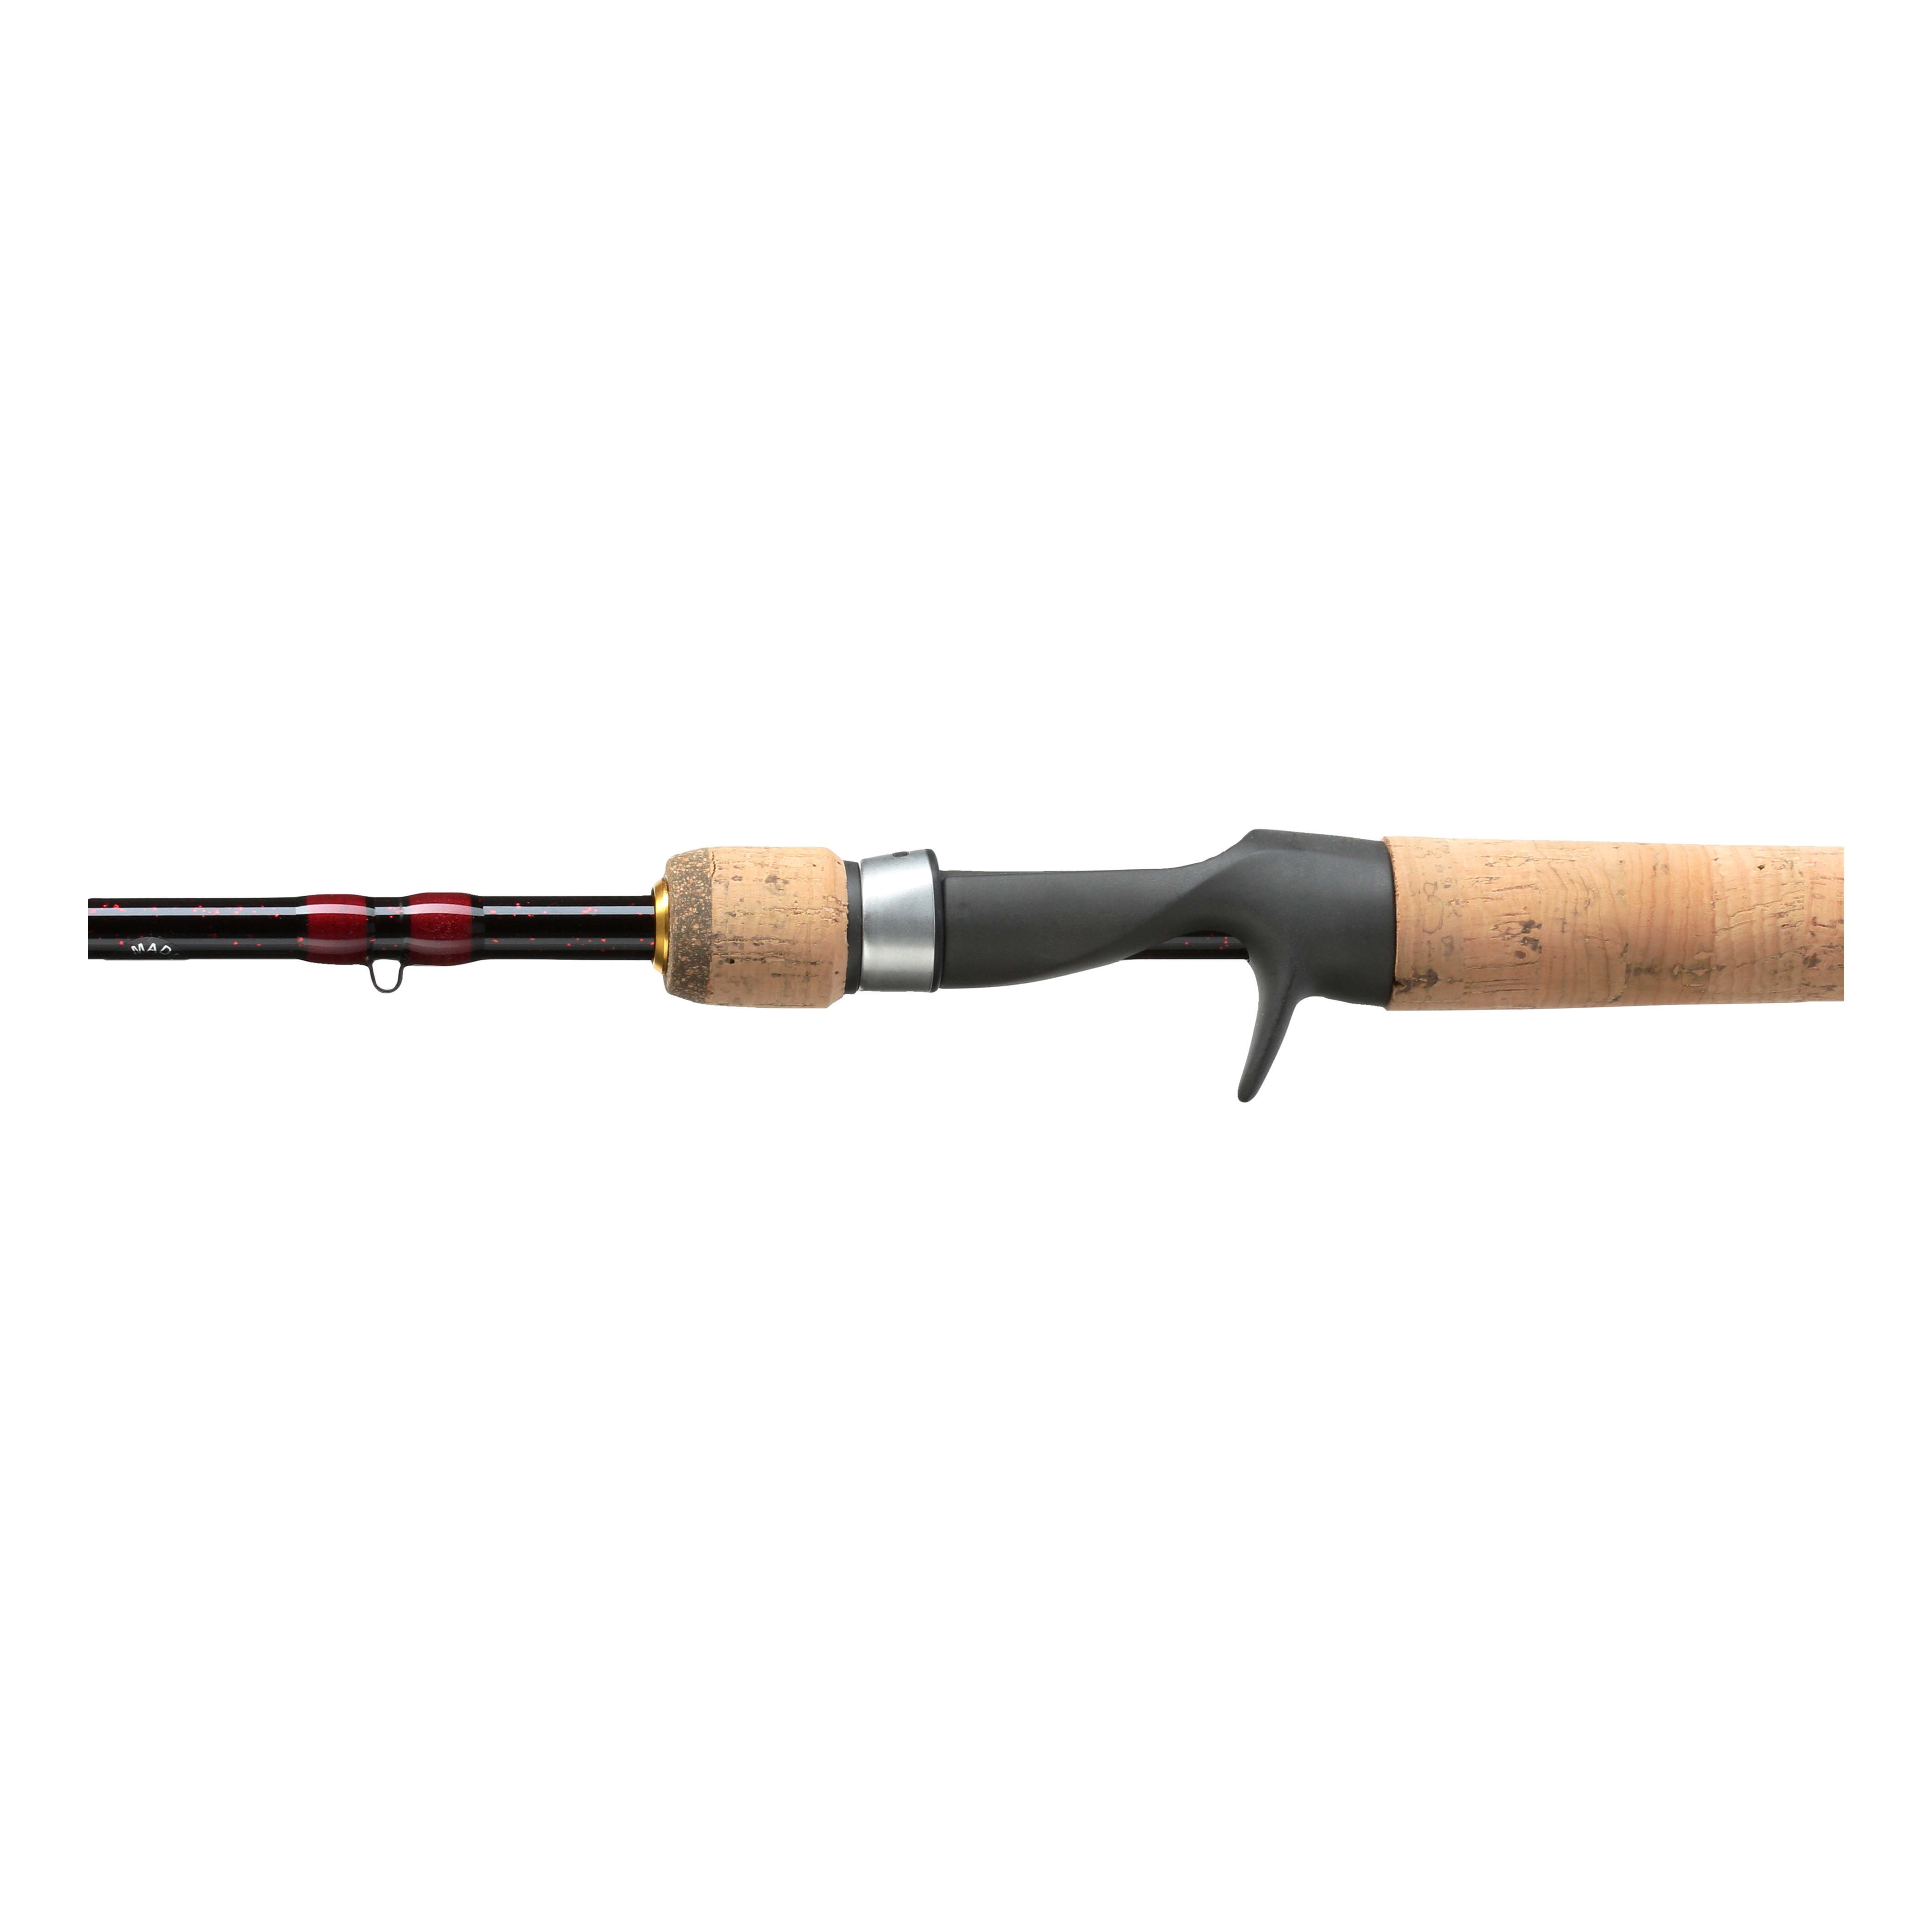 Shakespeare® Ugly Stik® Carbon 2-Piece Casting Rod